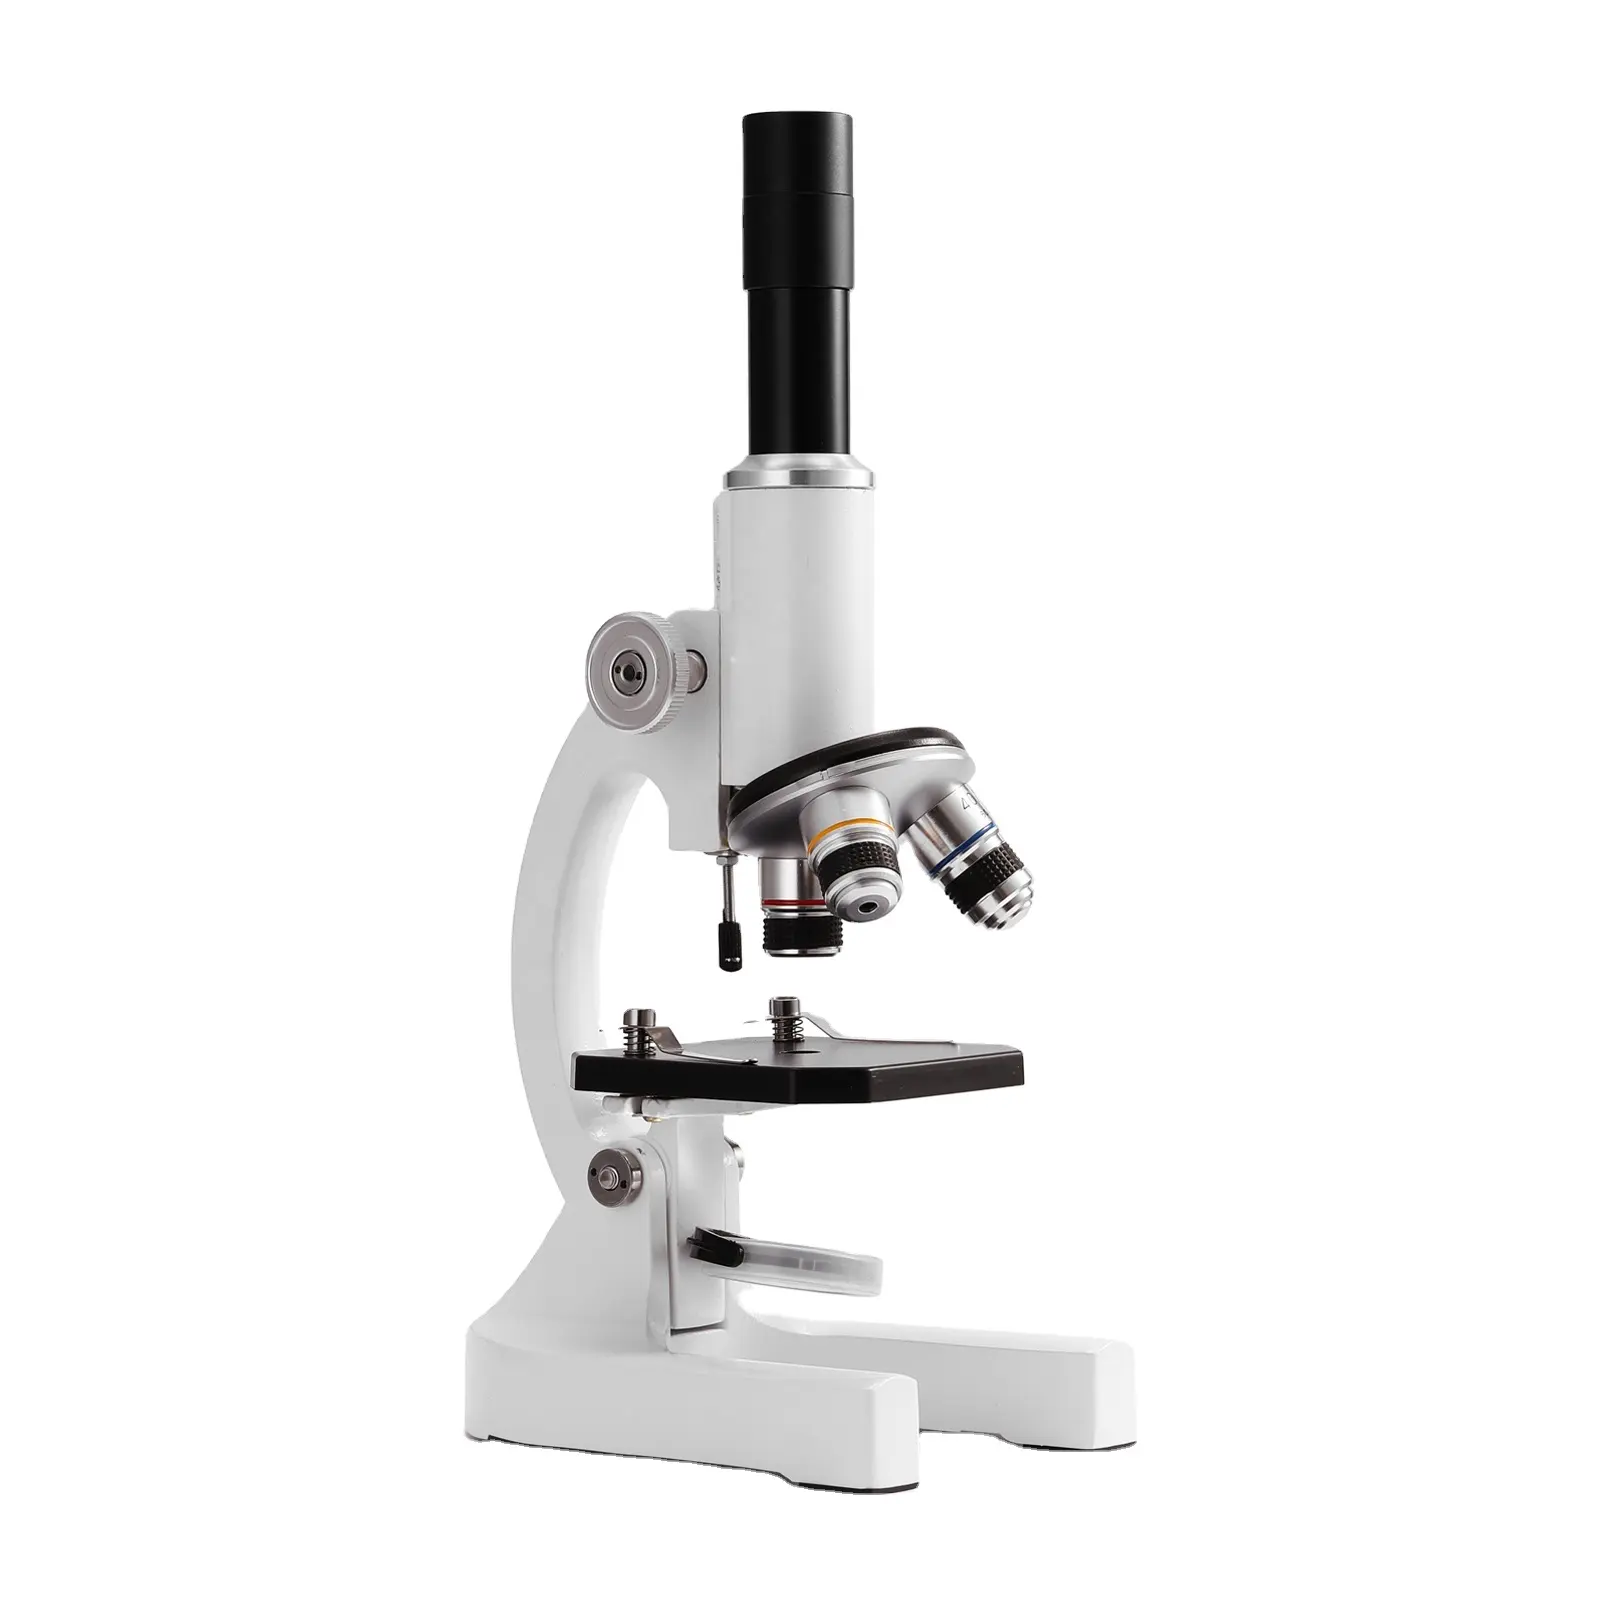 China factory cheap price price monocular optical microscope digital stereo microscope for School Teaching and Lab Research